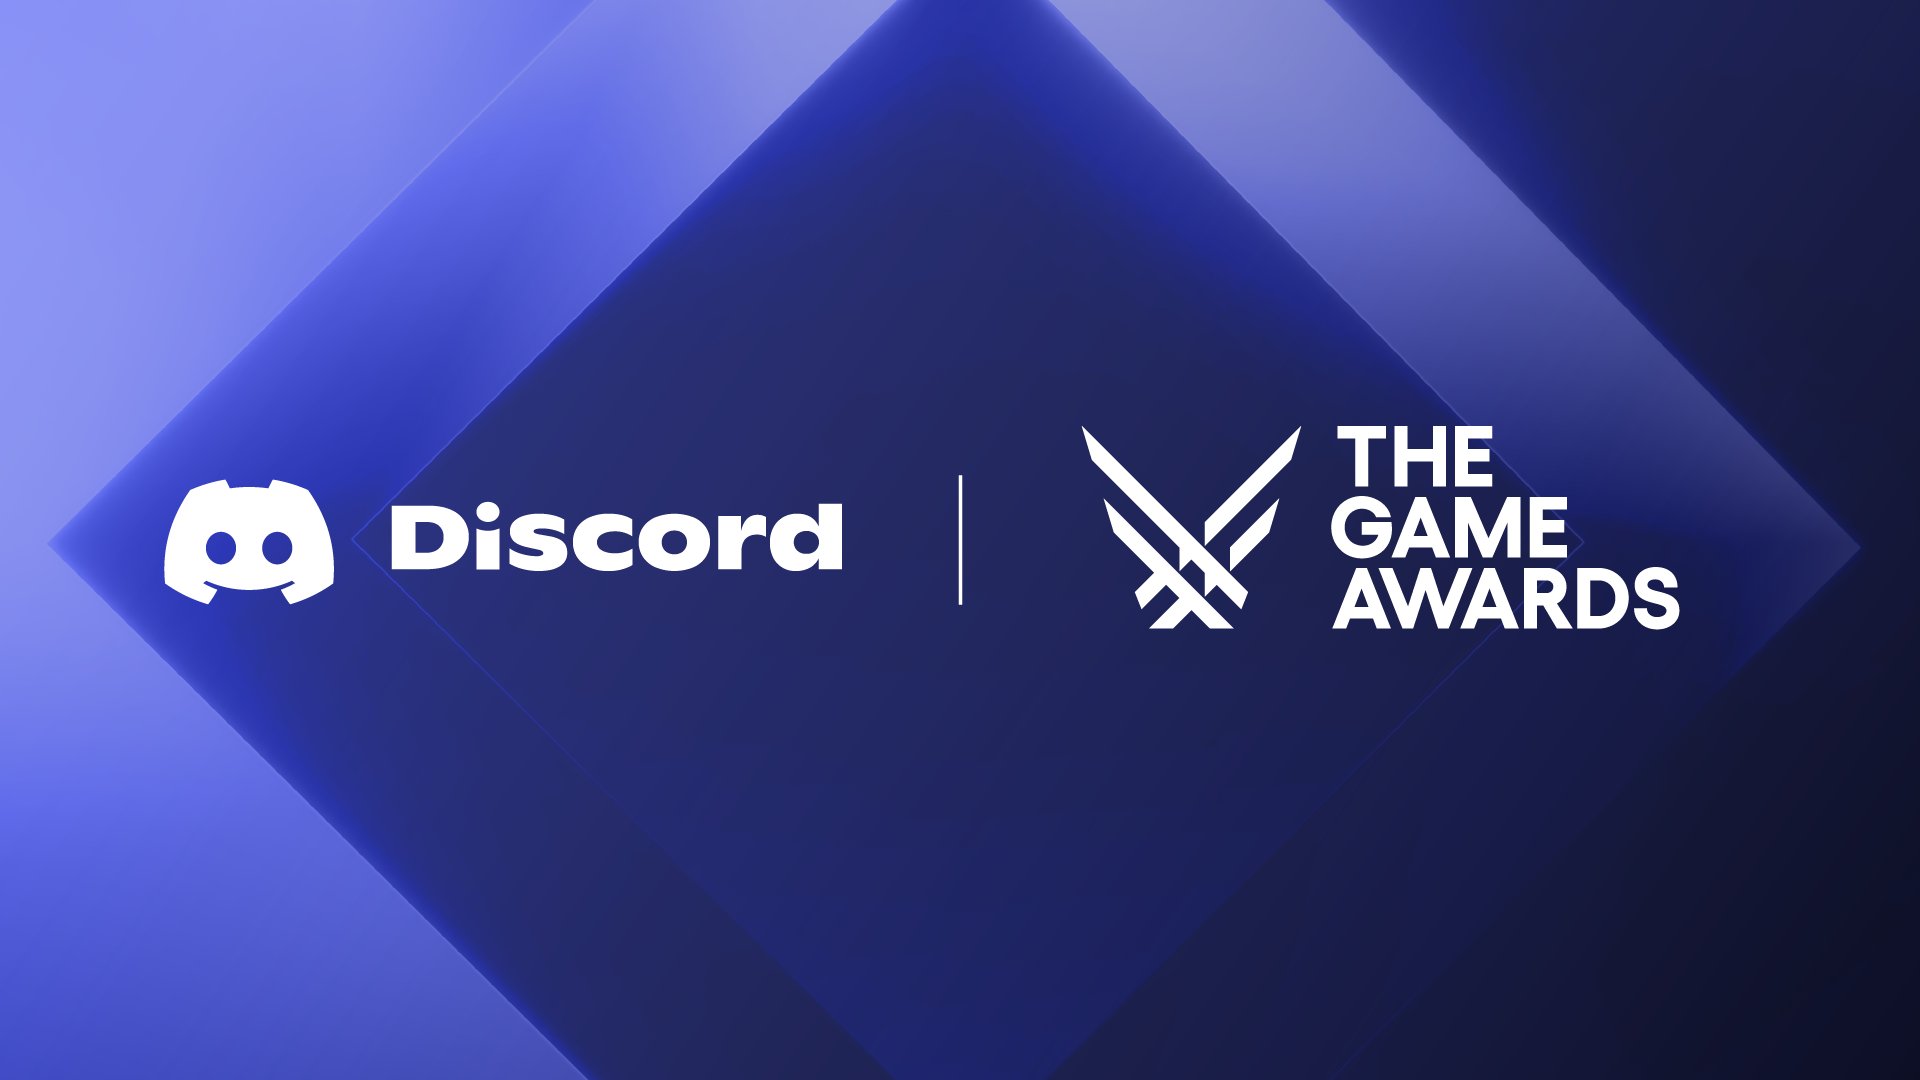 The Game Awards on X: The nominees for #TheGameAwards will be